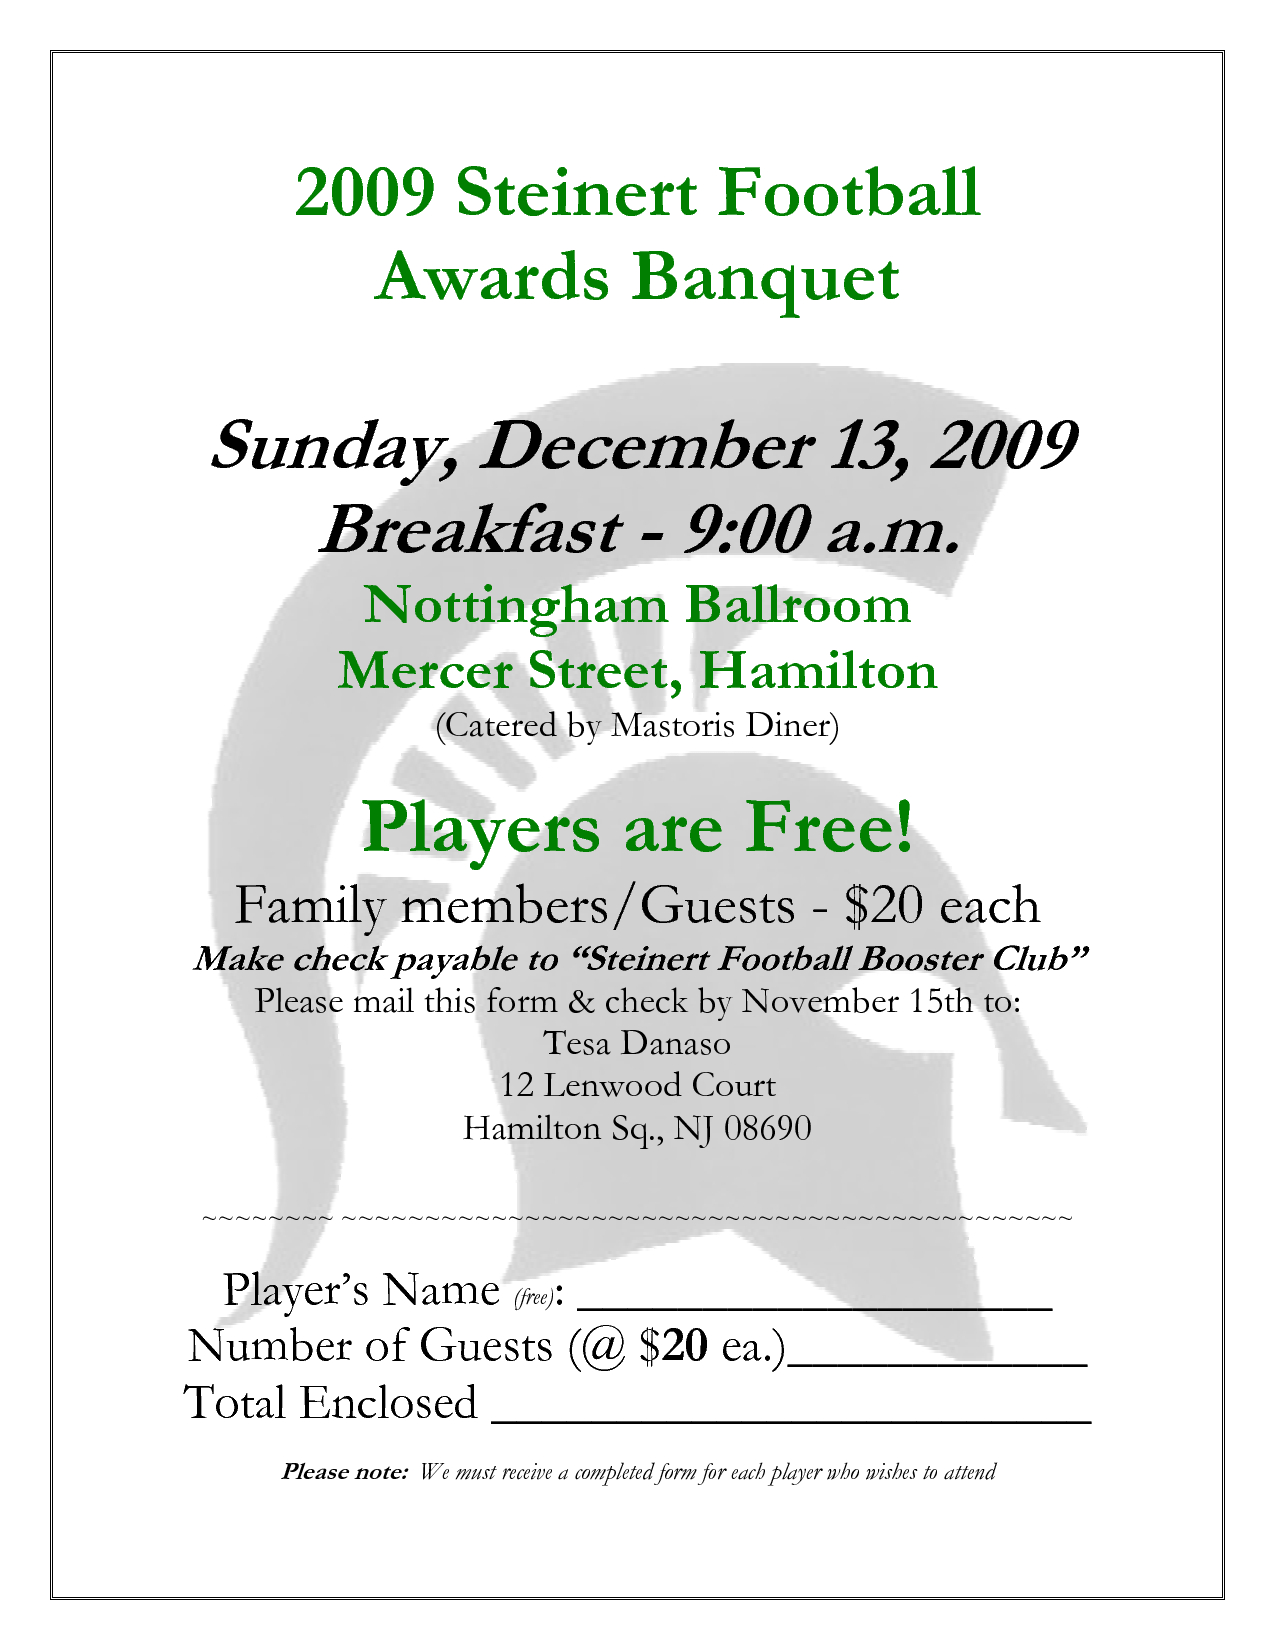 Football Banquet Invitation Template Football Banquet Invitation intended for dimensions 1275 X 1650